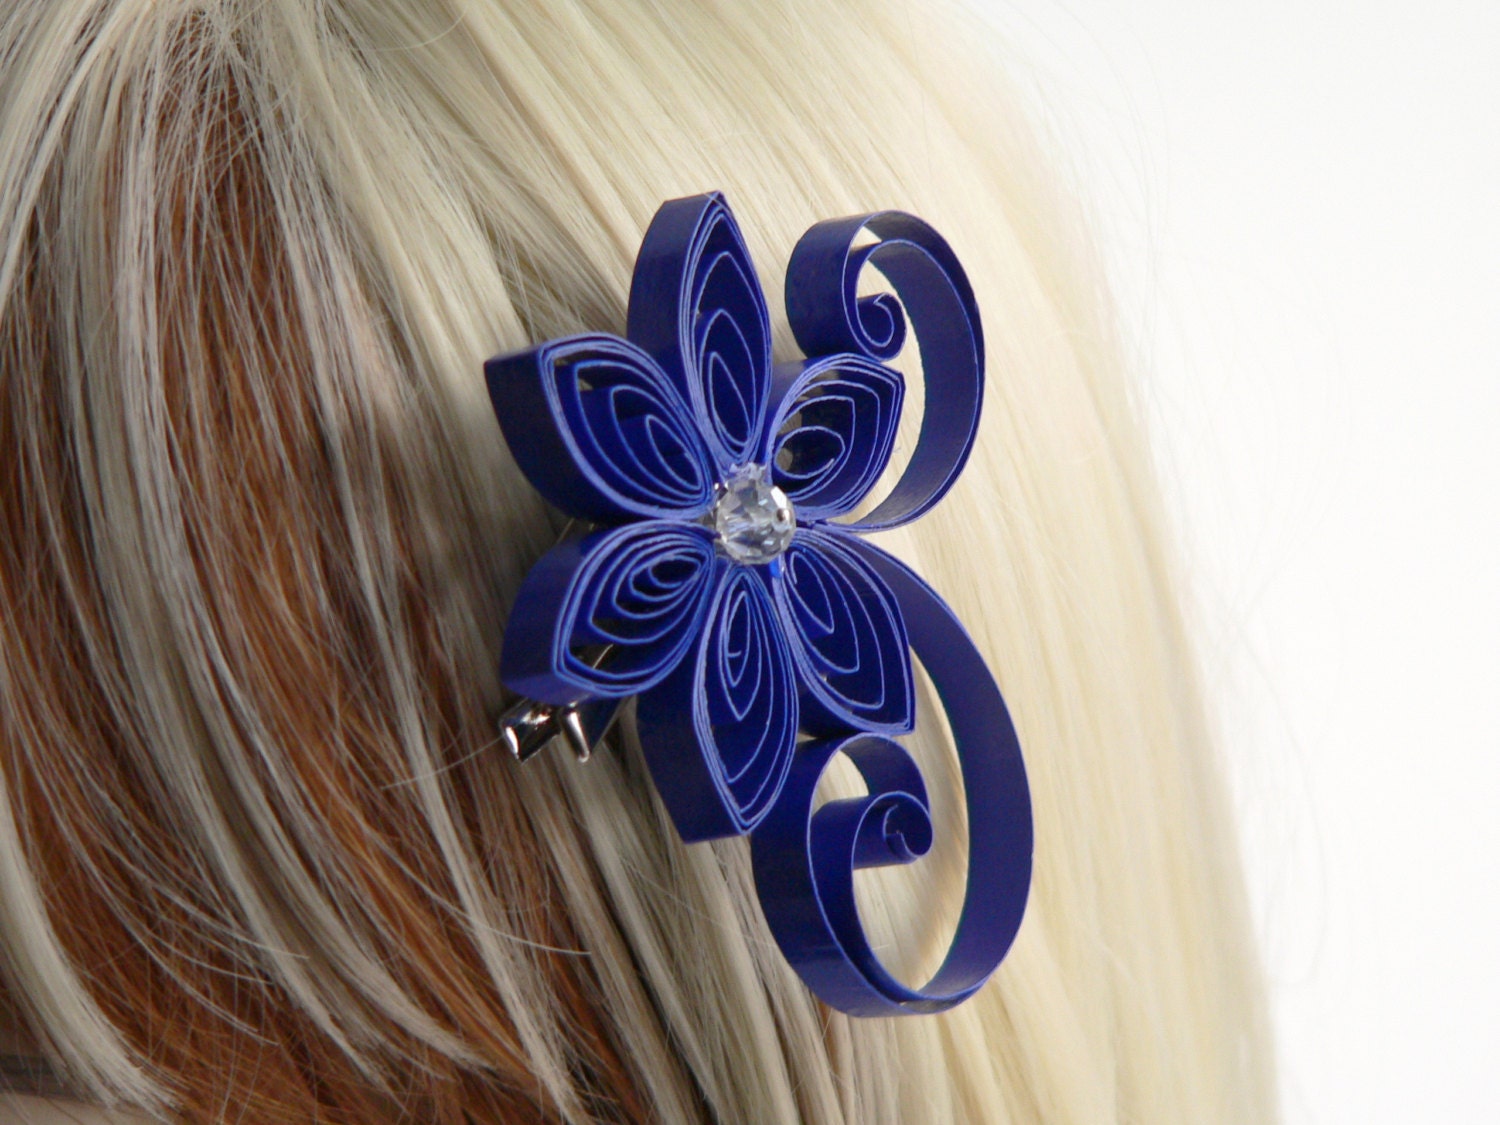 6. Bridal Hair Vine with Royal Blue Accents - wide 5